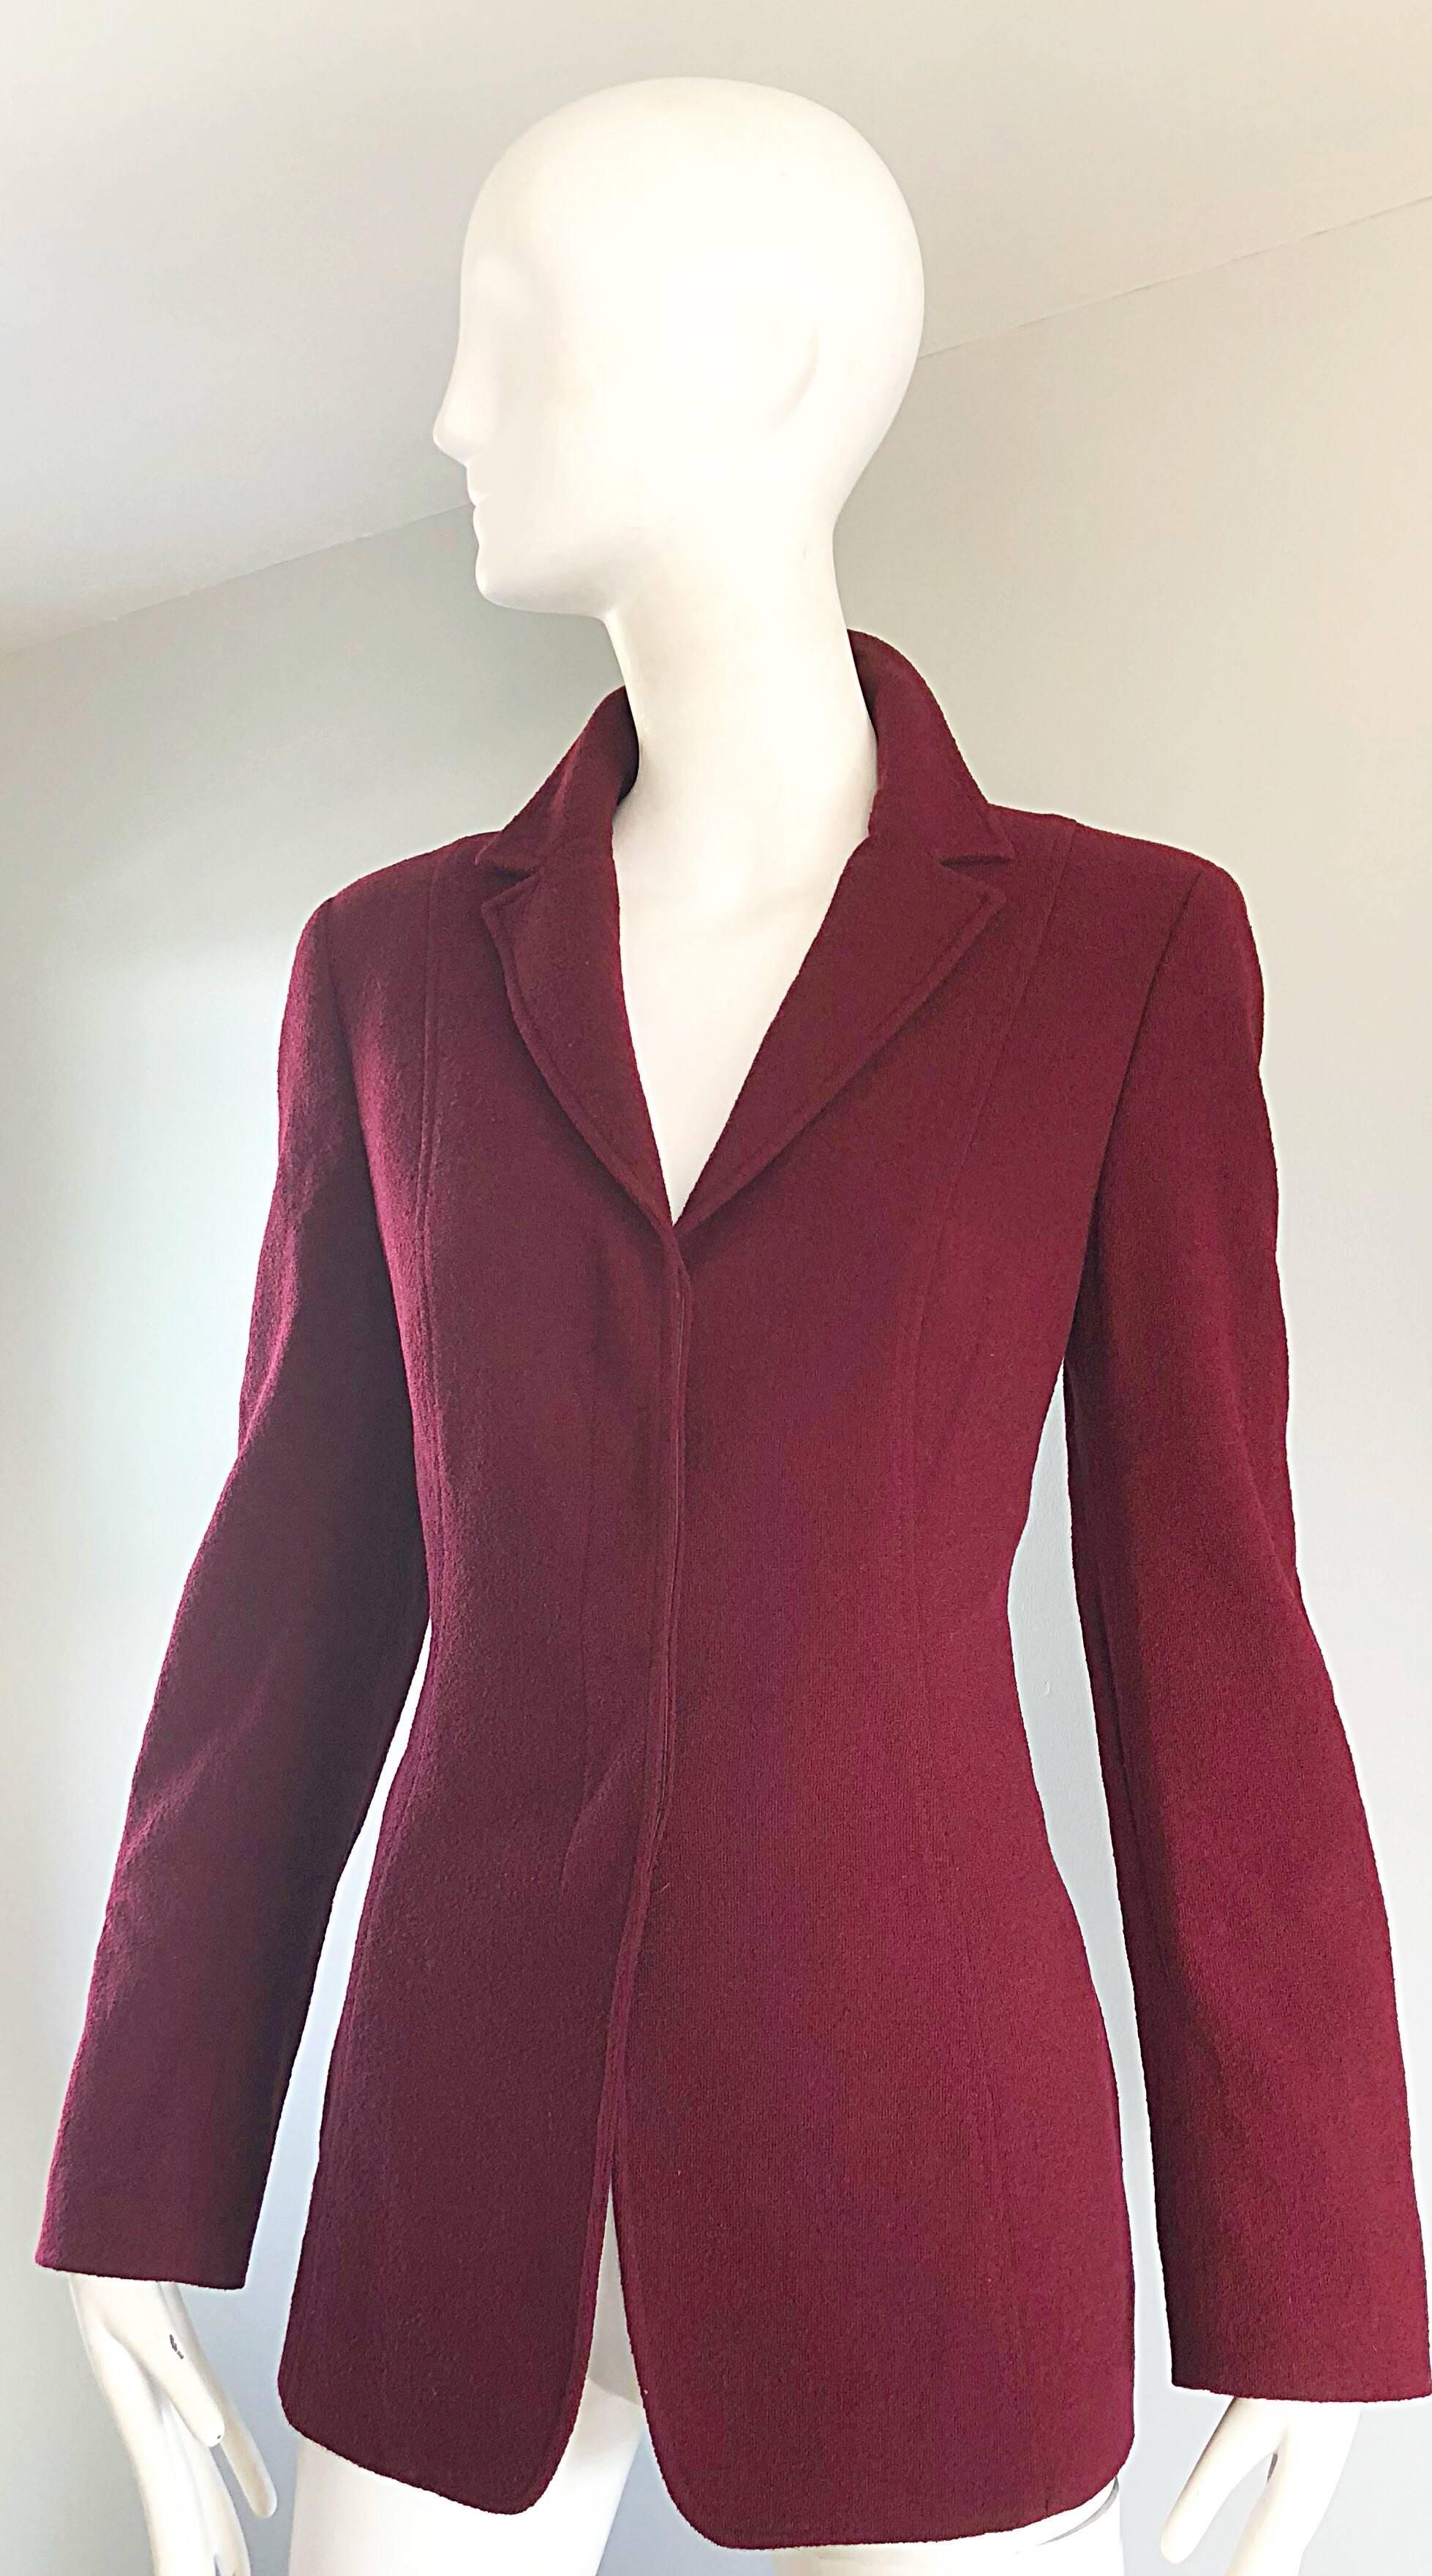 Chic 90s CALVIN KLEIN COLLECTION burgundy / maroon virgin wool blazer jacket! Features a smart tailored fit, with three hidden buttons down the front. Fully lined. Pockets at each side of the waist. Can easily be dressed up or down. Great with